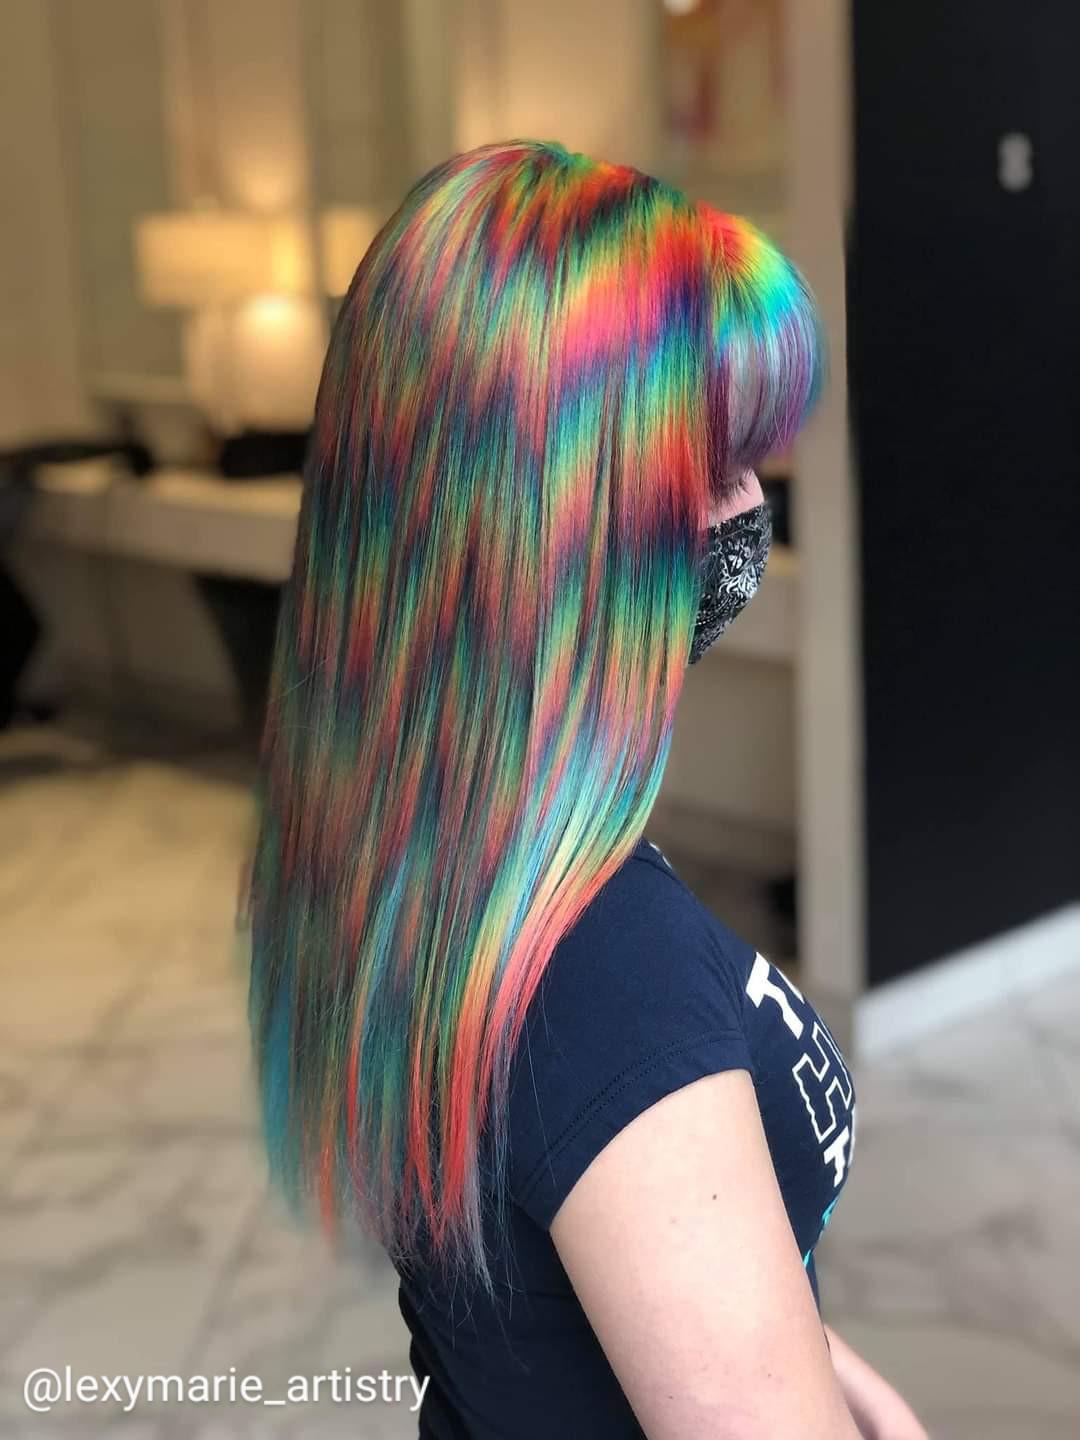 This hairstylist's coloring talent